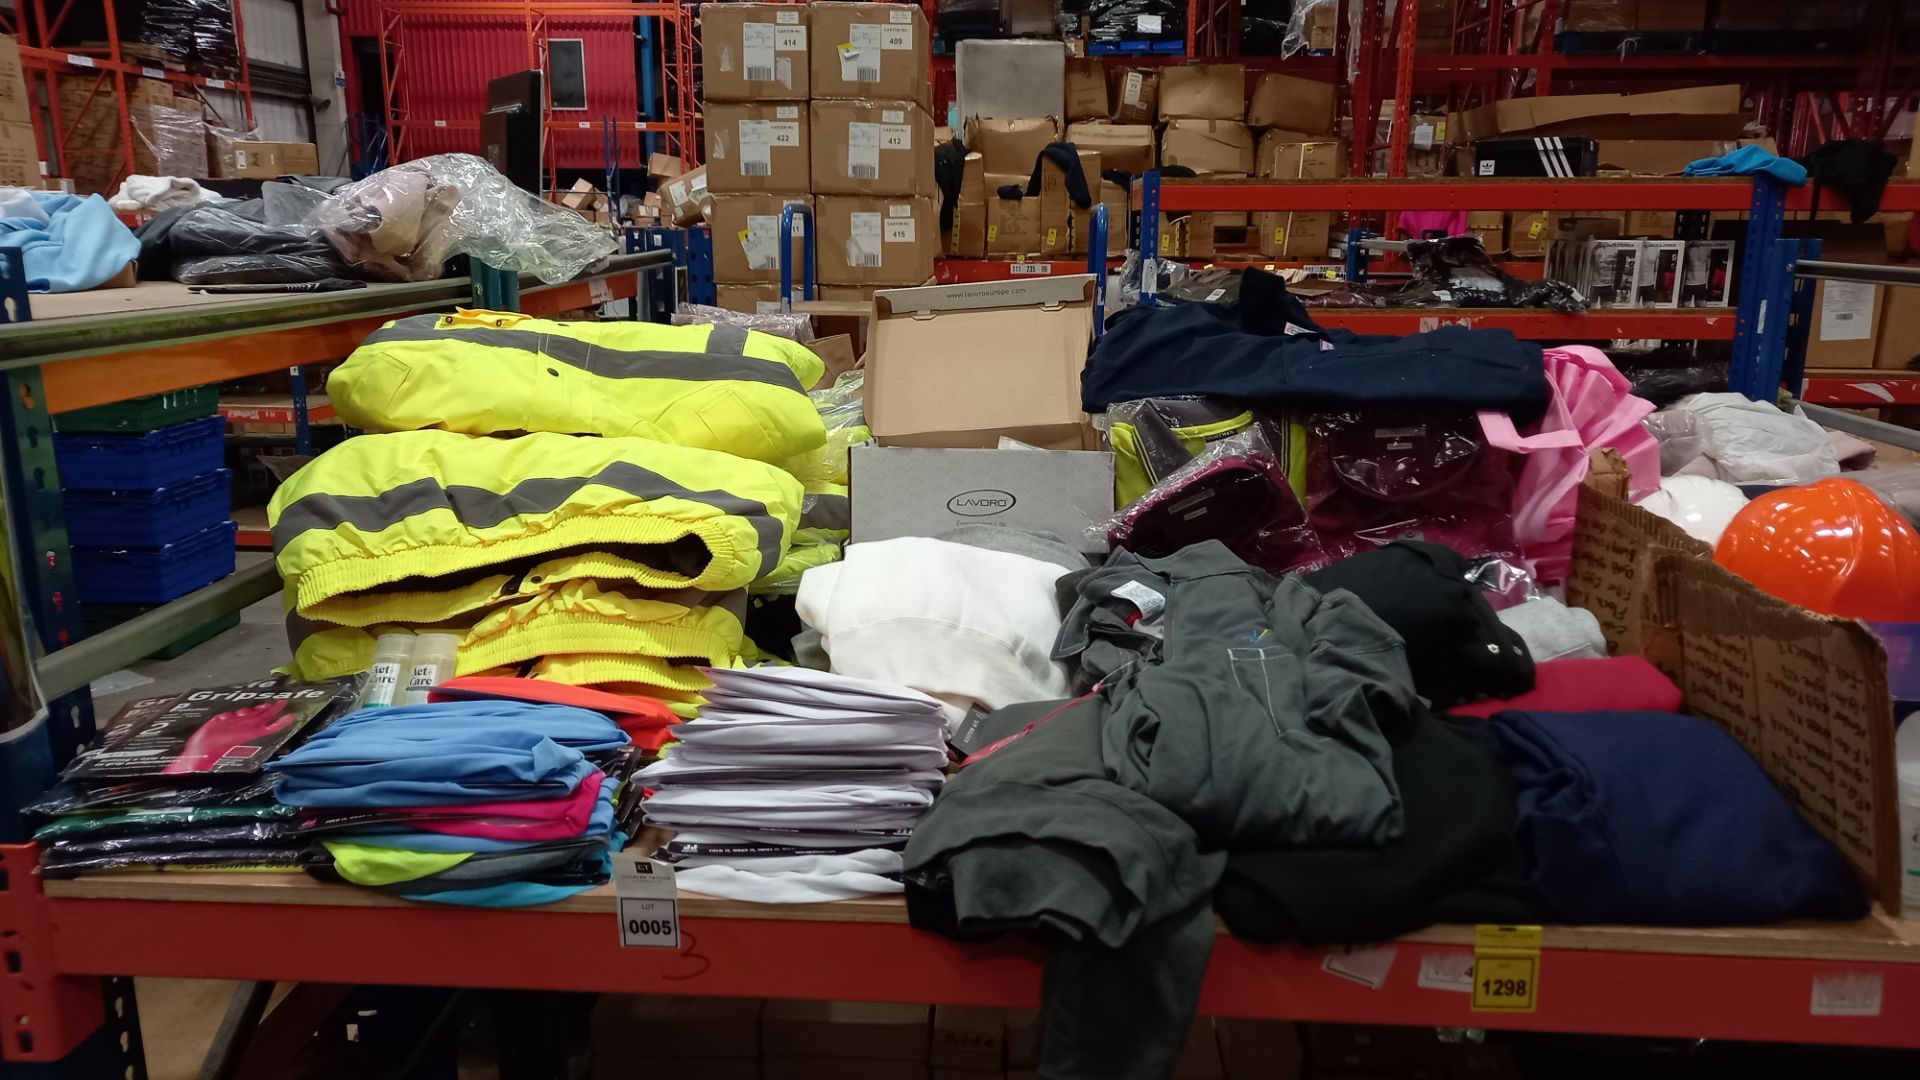 60 + PIECE MIXED WORK CLOTHING LOT CONTAINING HIGH VISIBILITY JACKETS, WORK GLOVES, VARIOUS SNOODES,